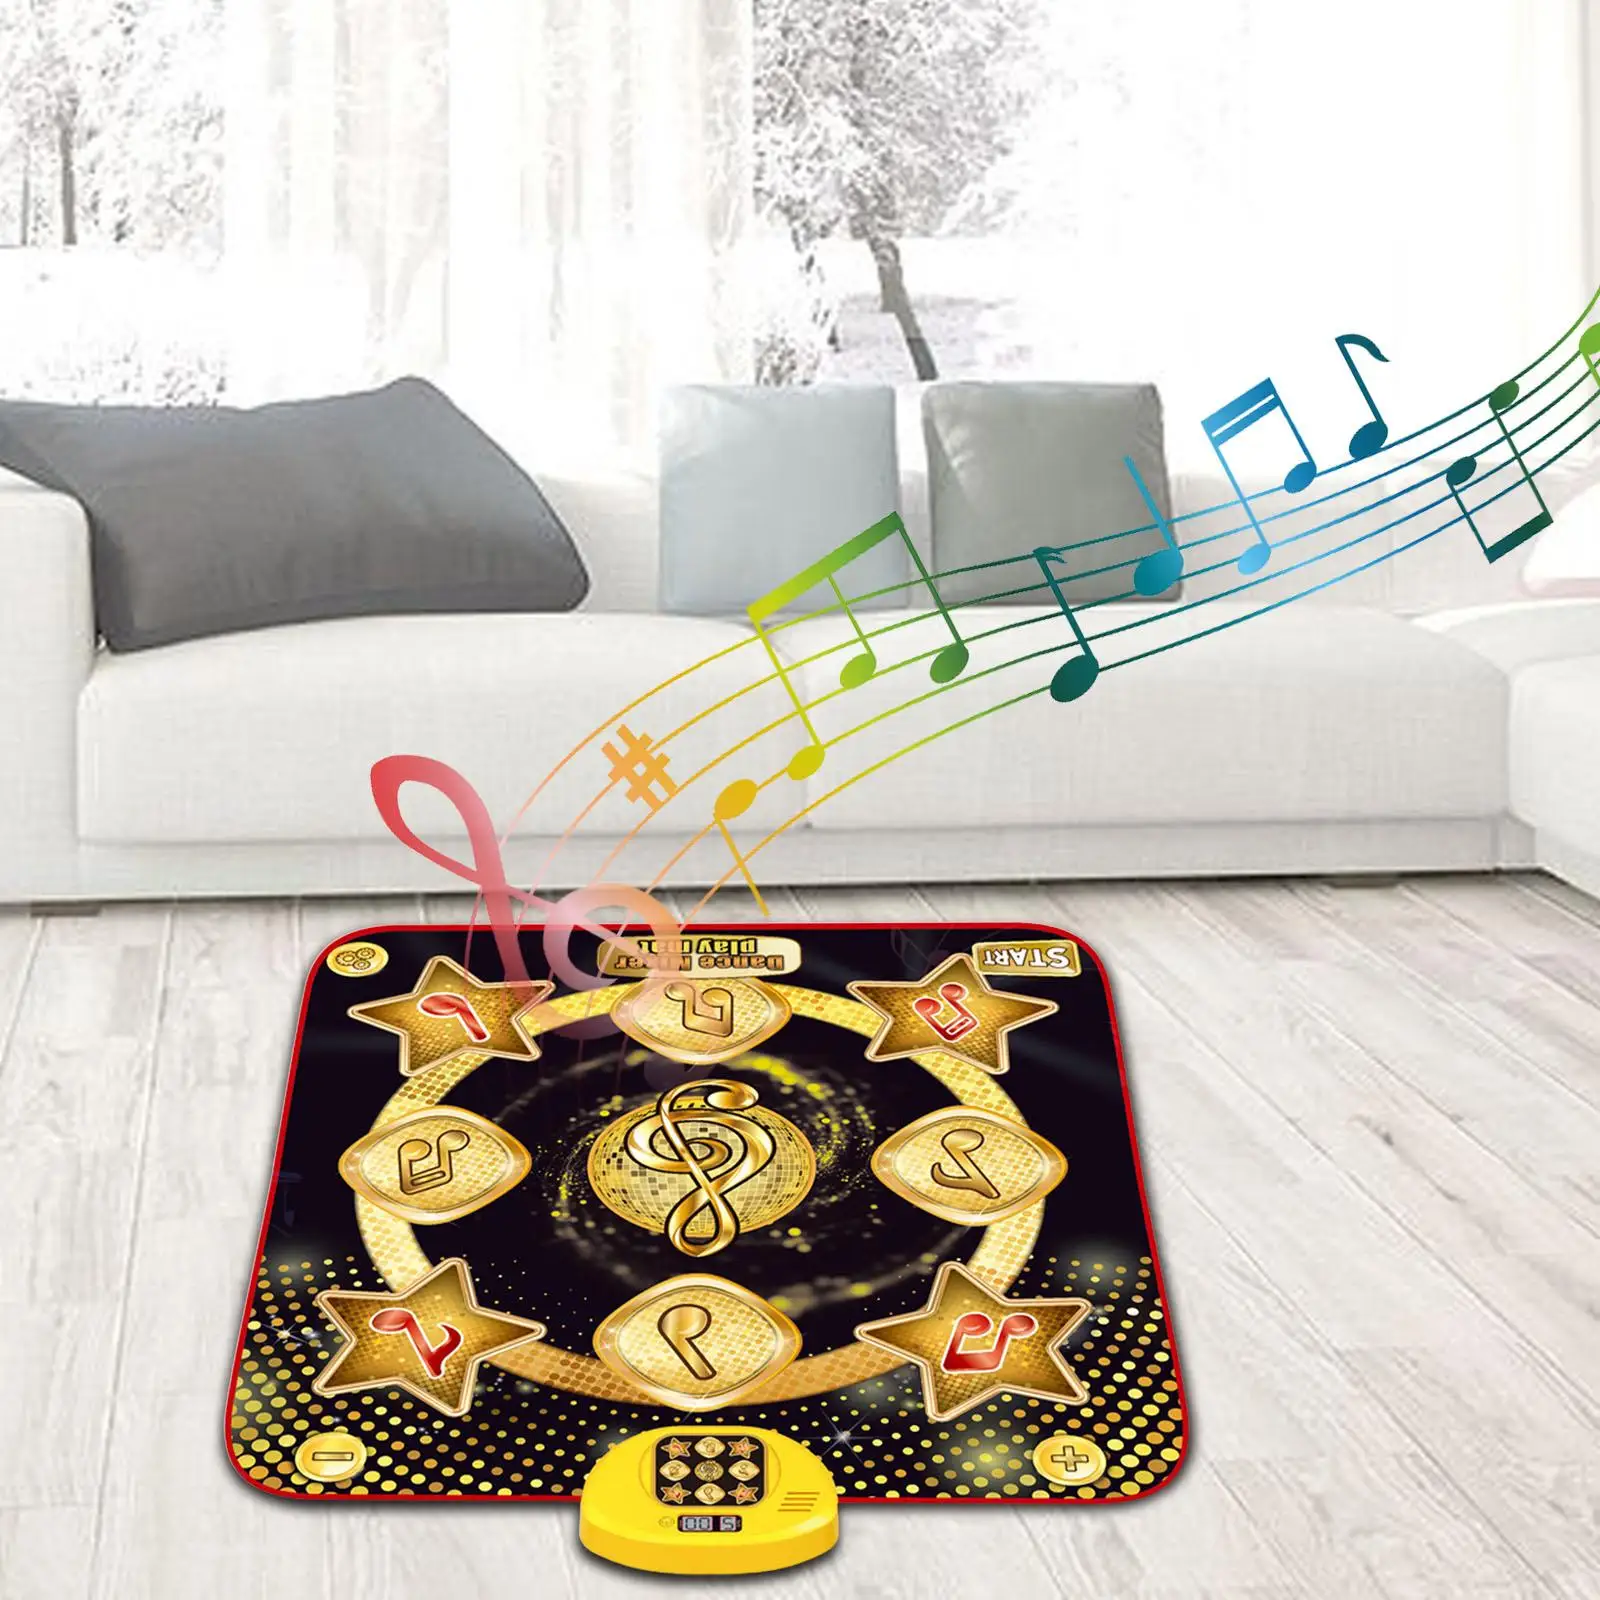 Dance Mat Early Education Toys Waterproof Light up Dance Game Pad Step Rhythm Play Mat Playmat Dancing Blanket for Holiday Gifts